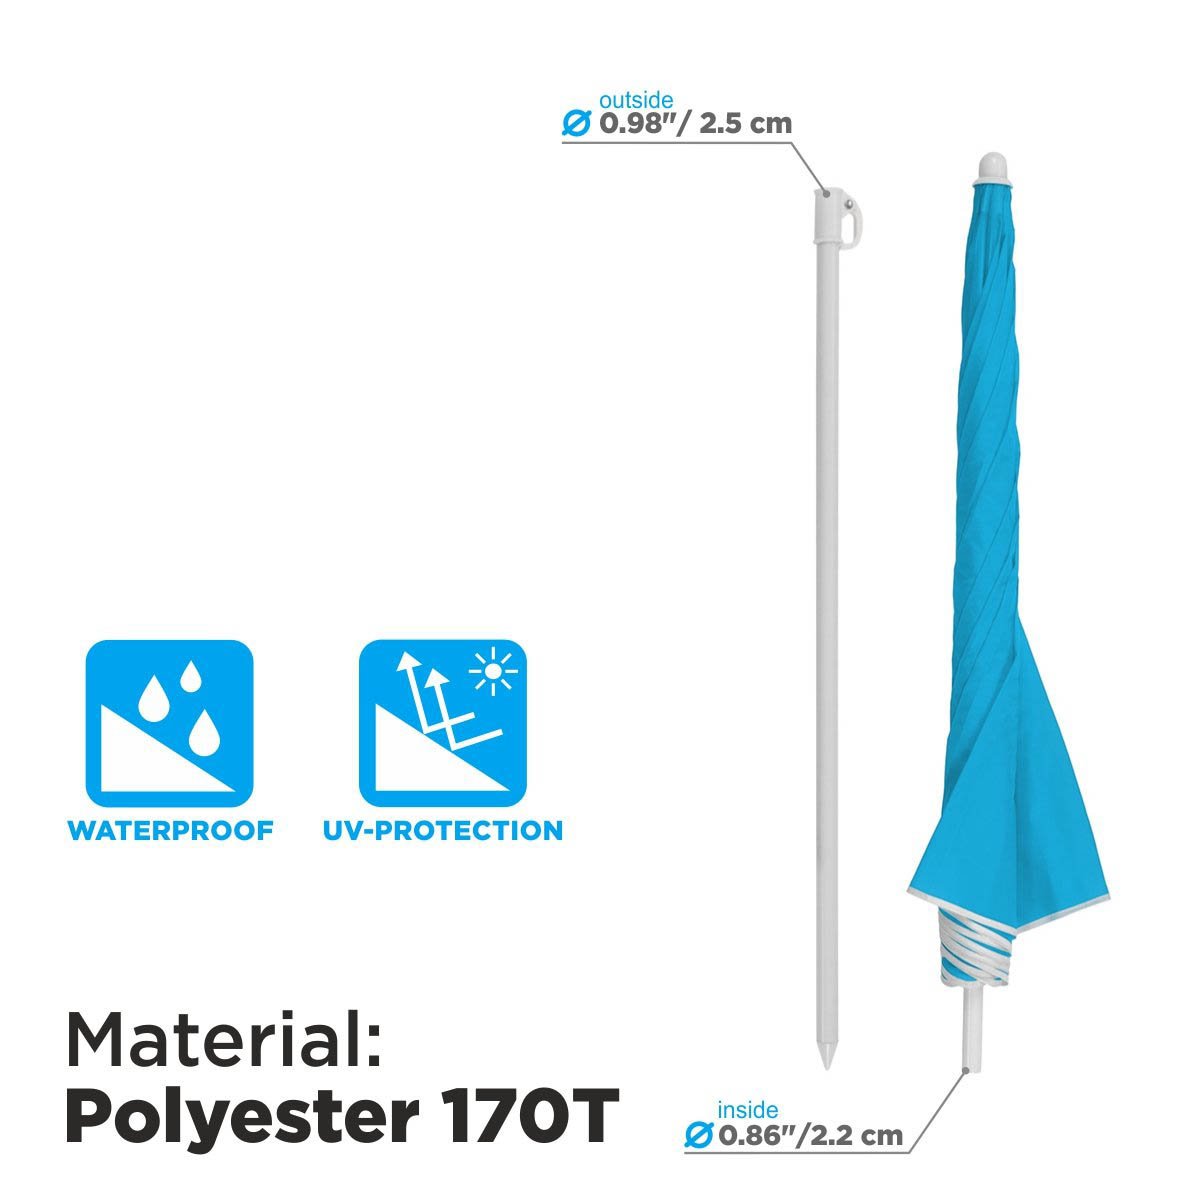 Sky Blue Tilting Beach Umbrella is made of waterproof polyester 170T featuring UV protection